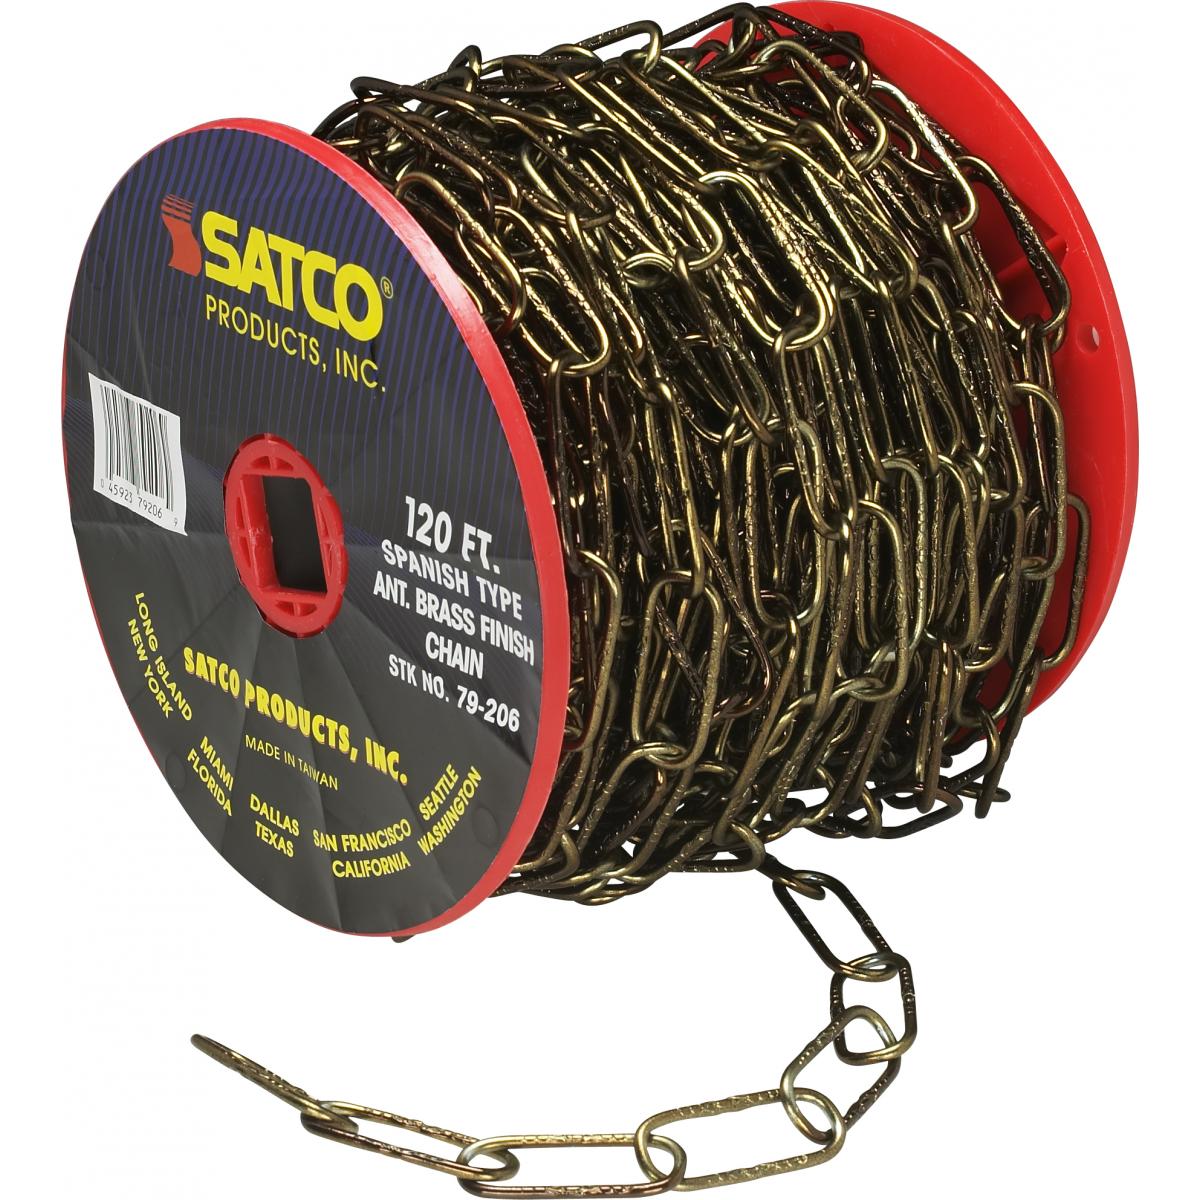 Satco 79-206 11 Ga. Chain Spanish Type Antique Brass Finish 50 yd. (150 ft.) to Reel 1 Reel To Master 15lbs Max